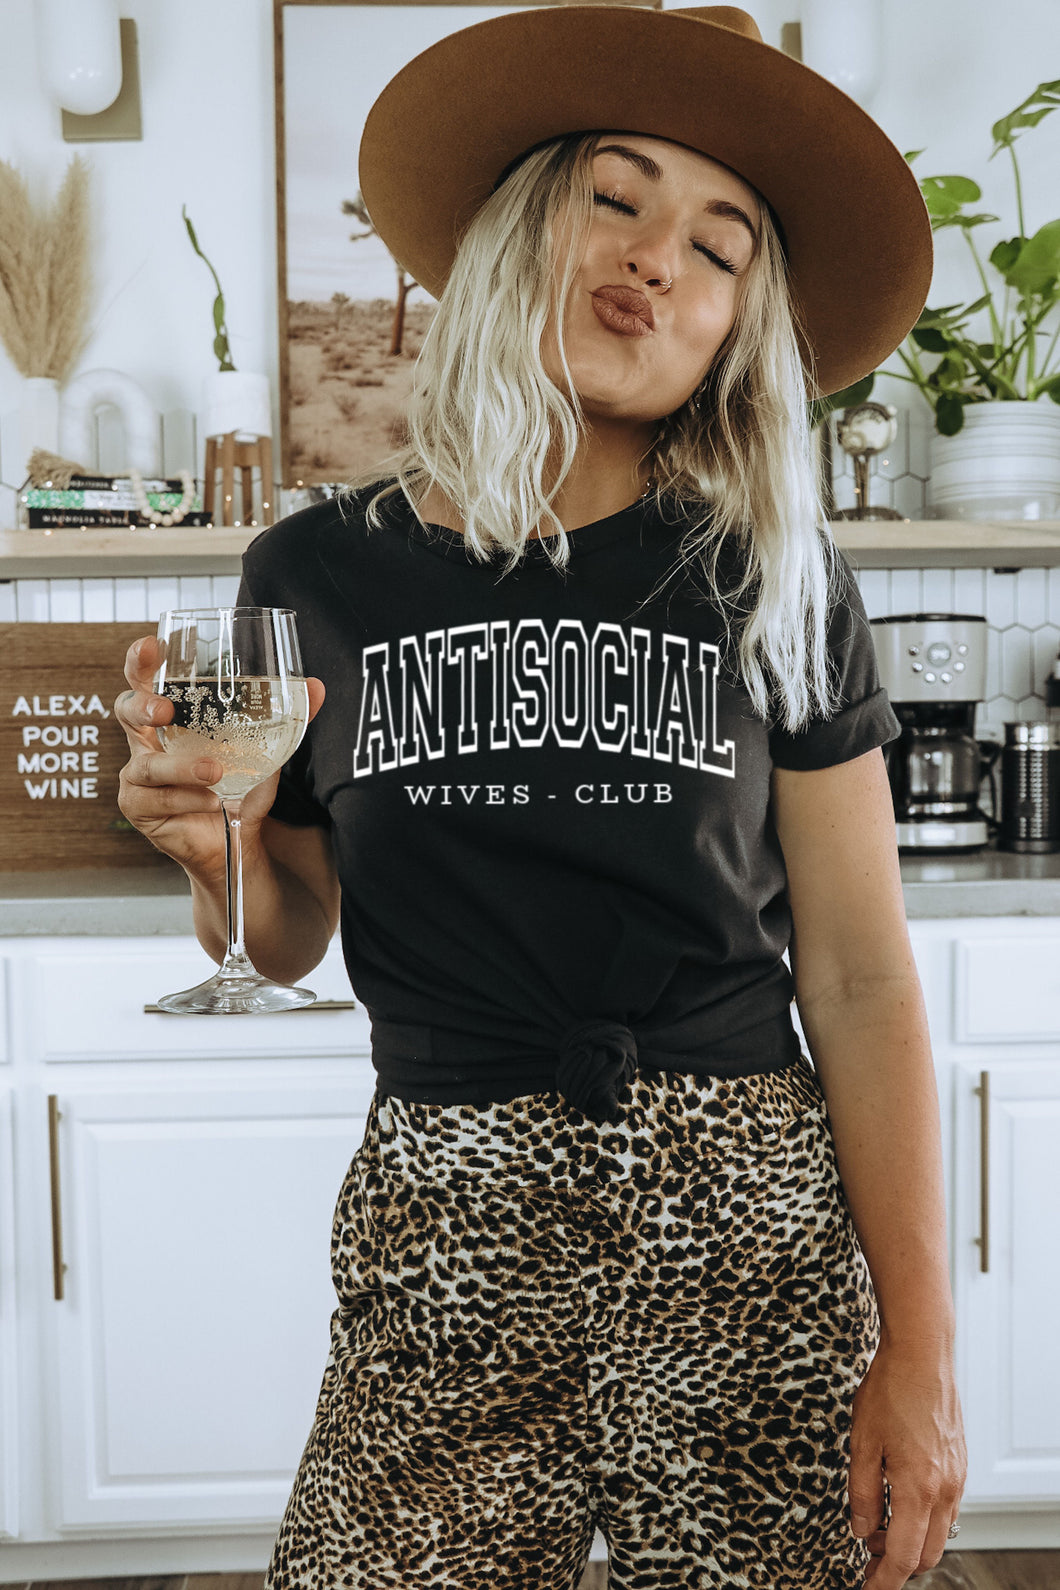 Antisocial Wives Club Tee